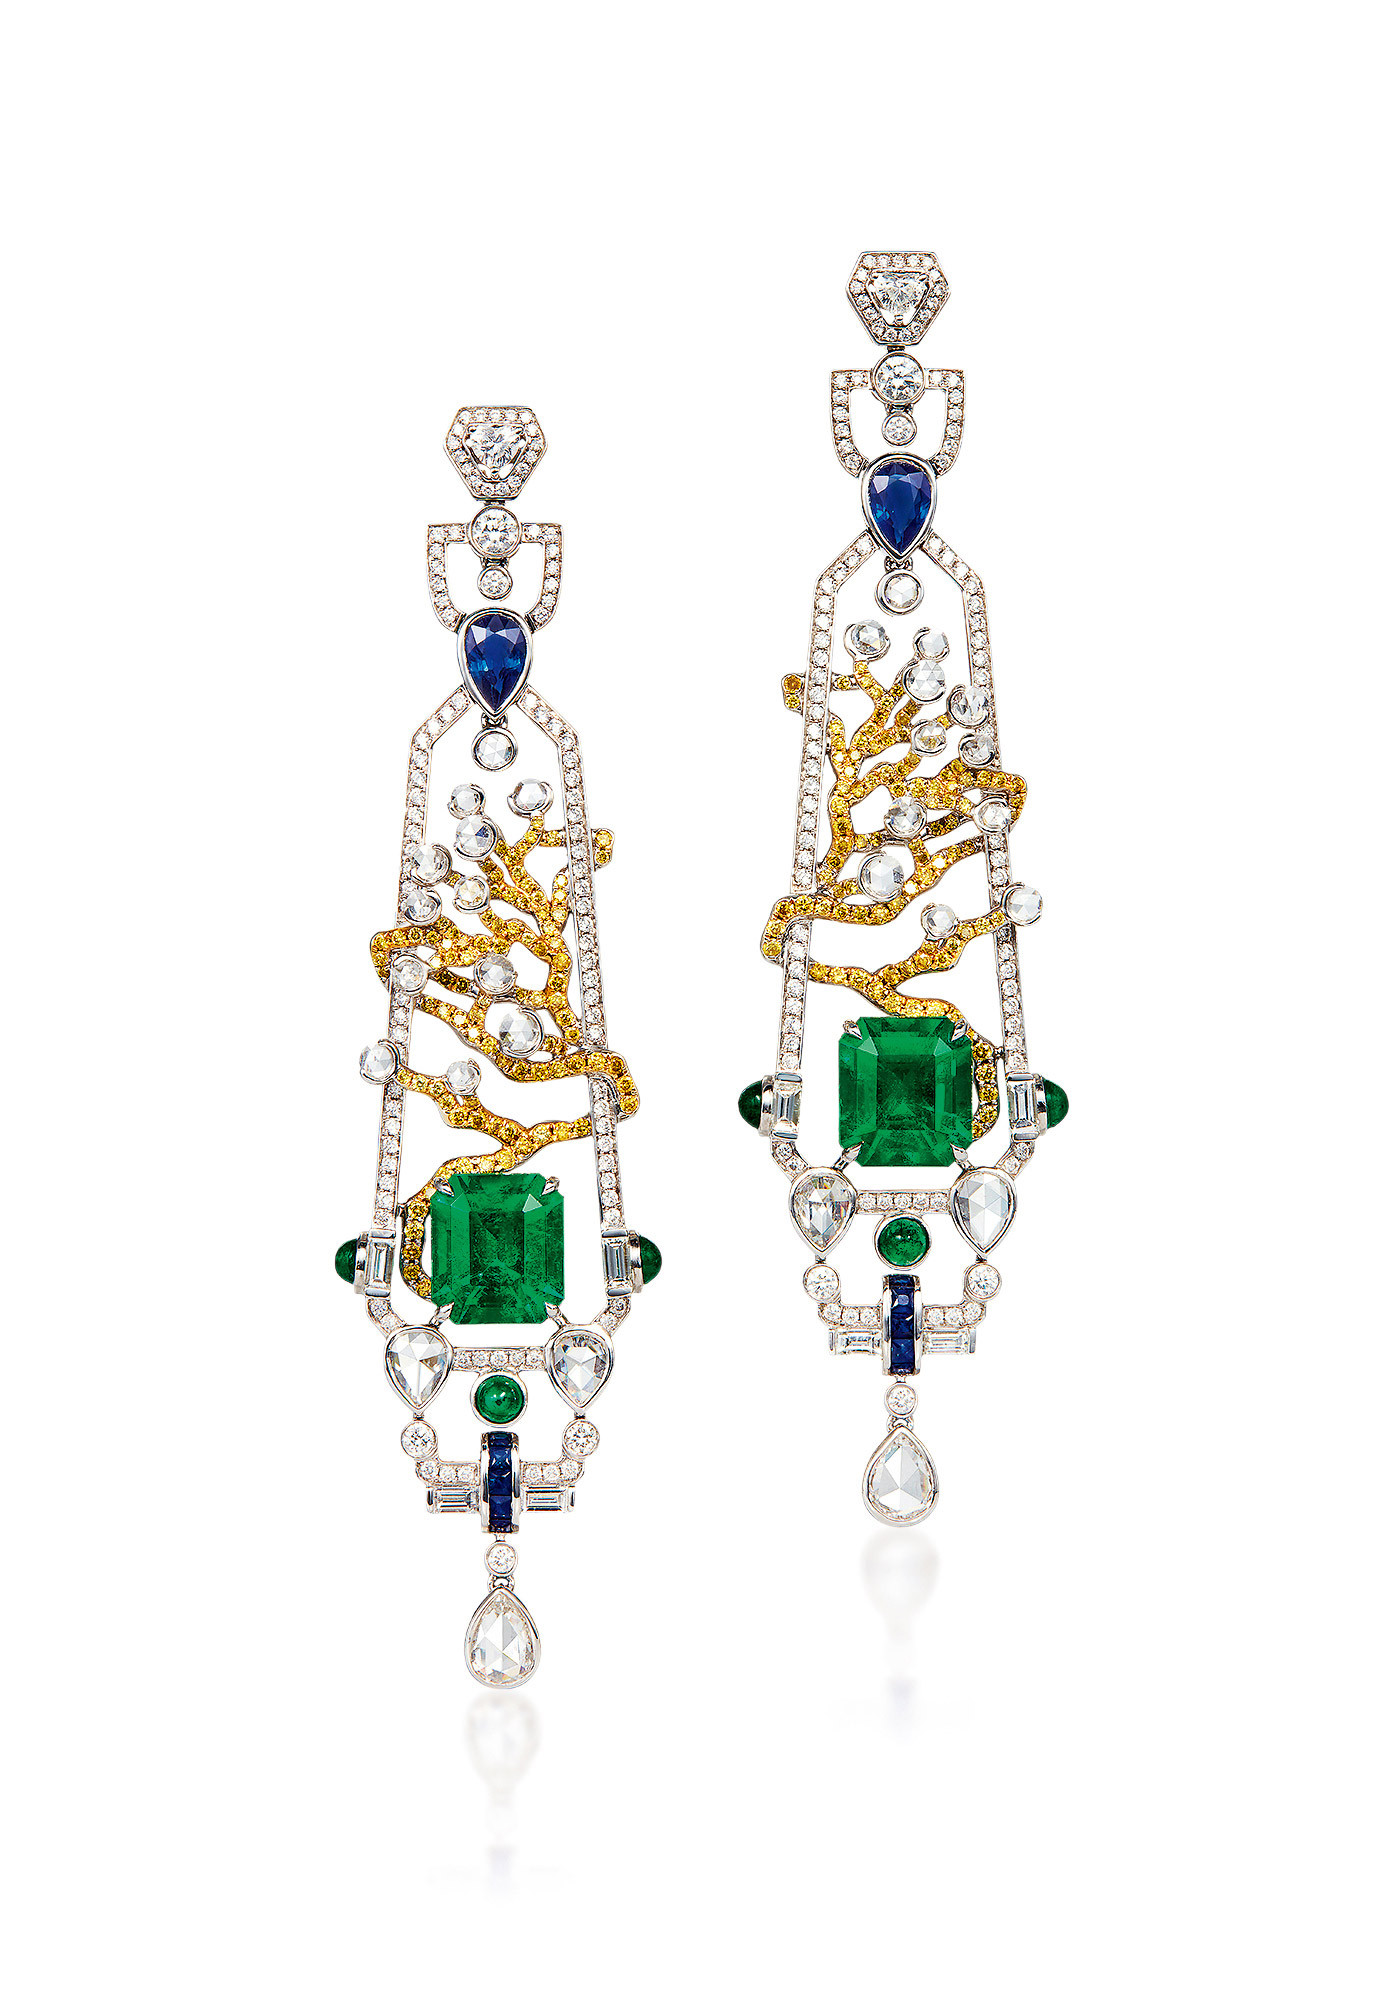 A PAIR OF 2.54 AND 2.68 COLOMBIAN EMERALD ’MUZO GREEN’ AND COLORED STONE EAR PENDANTS, by wang xiaoyu